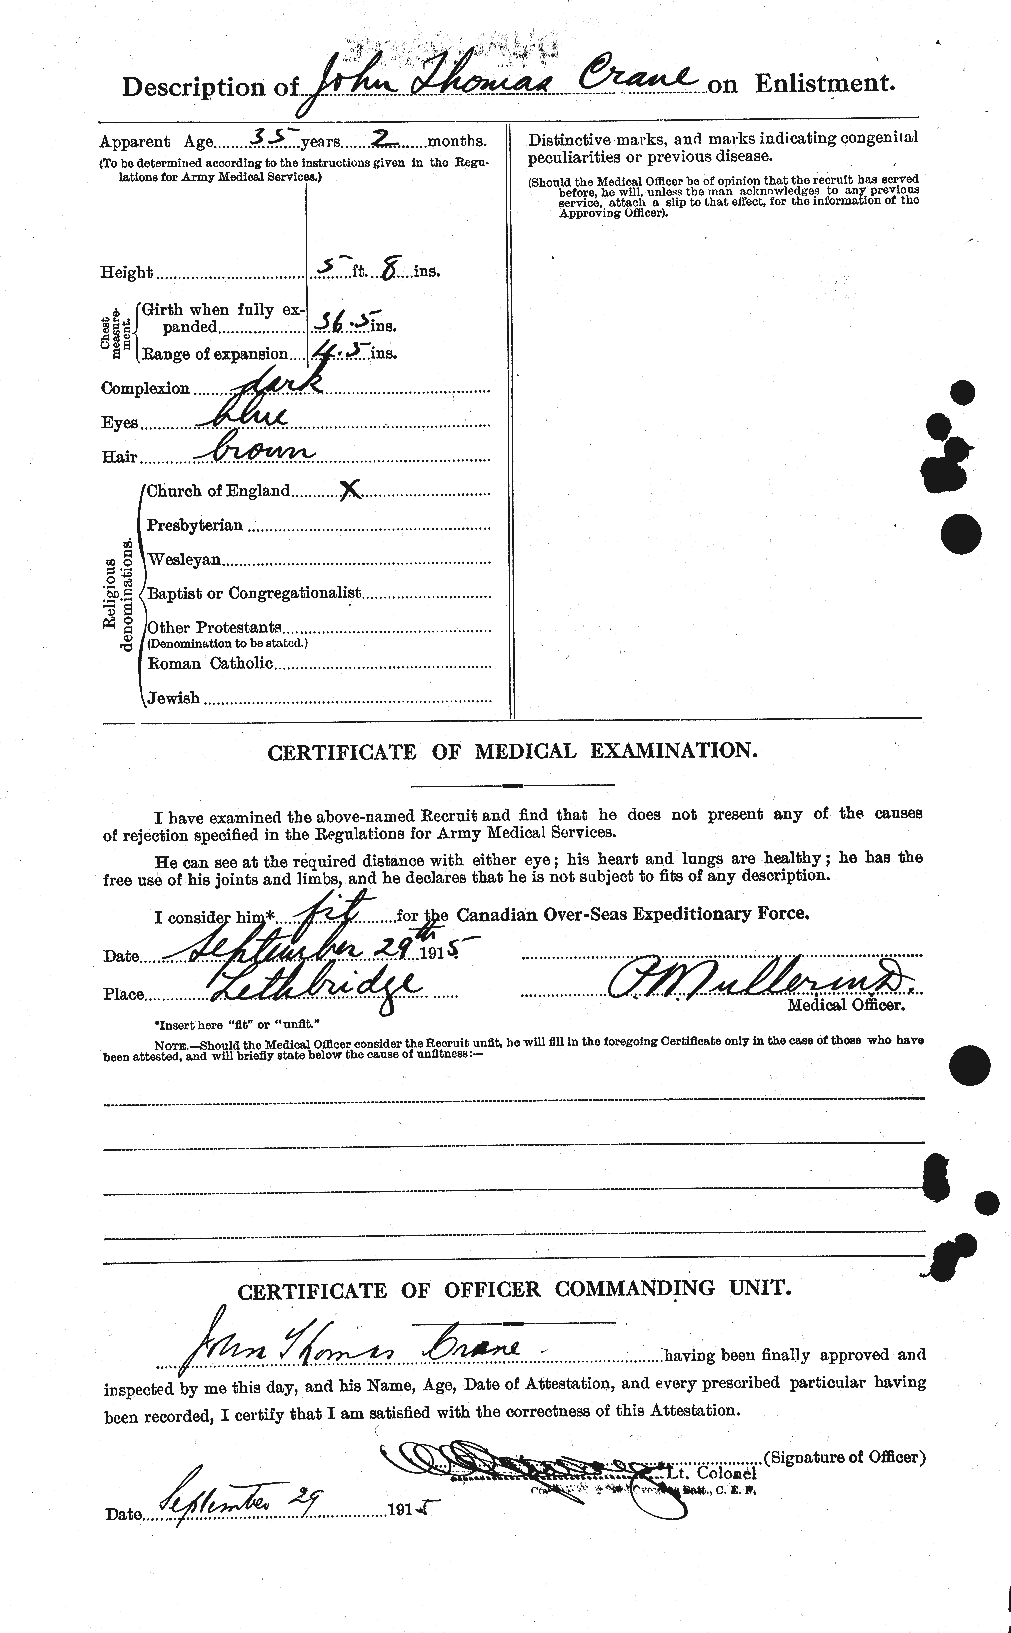 Personnel Records of the First World War - CEF 061767b